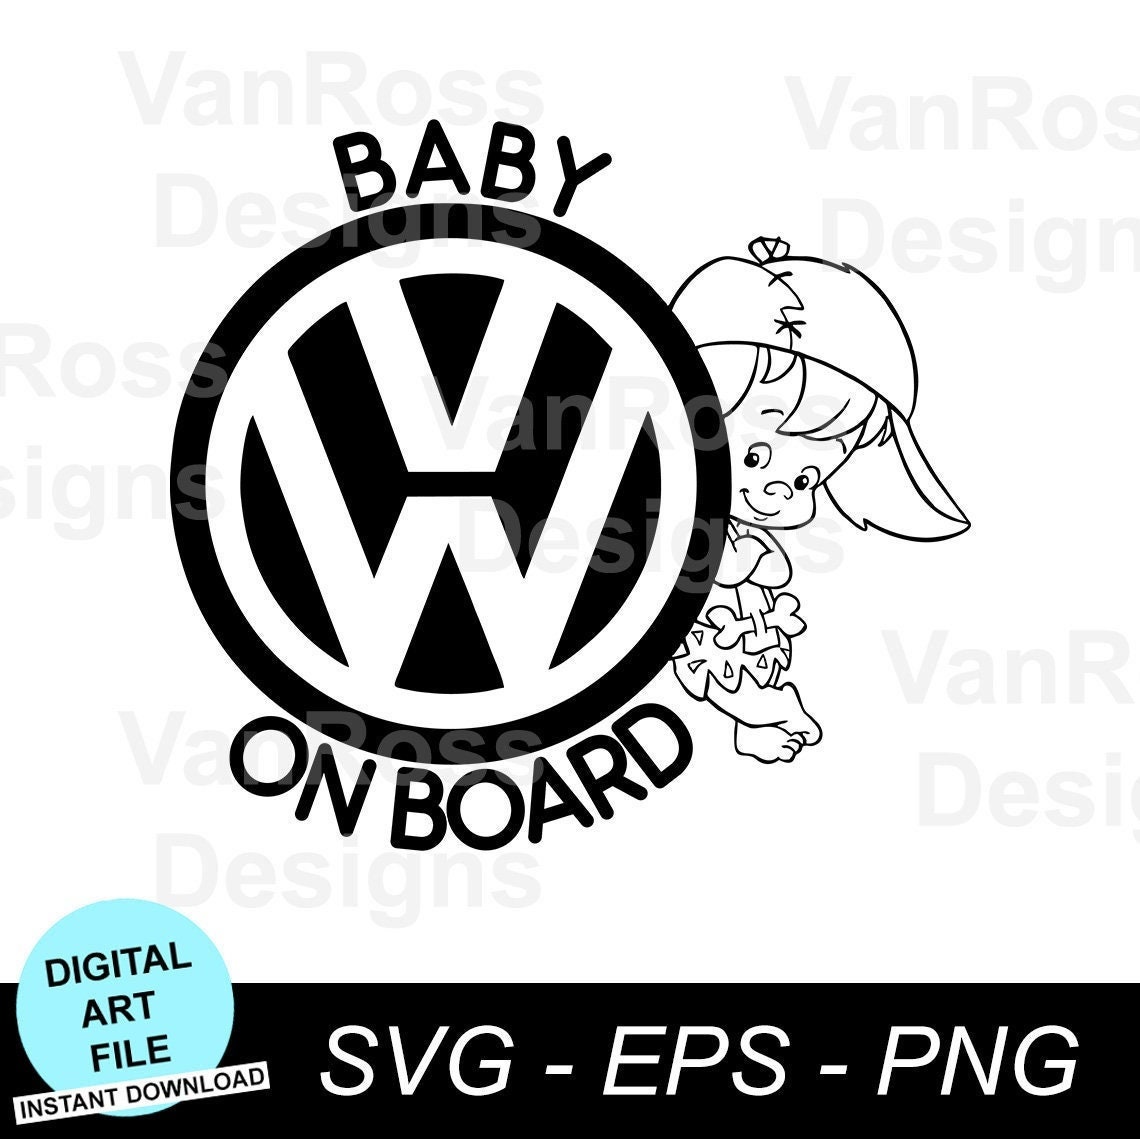 VW Baby on Board Sticker/decal Car Window Car Bumper Sticker Instant  Digital Download Svg, Png and Eps Files Included 